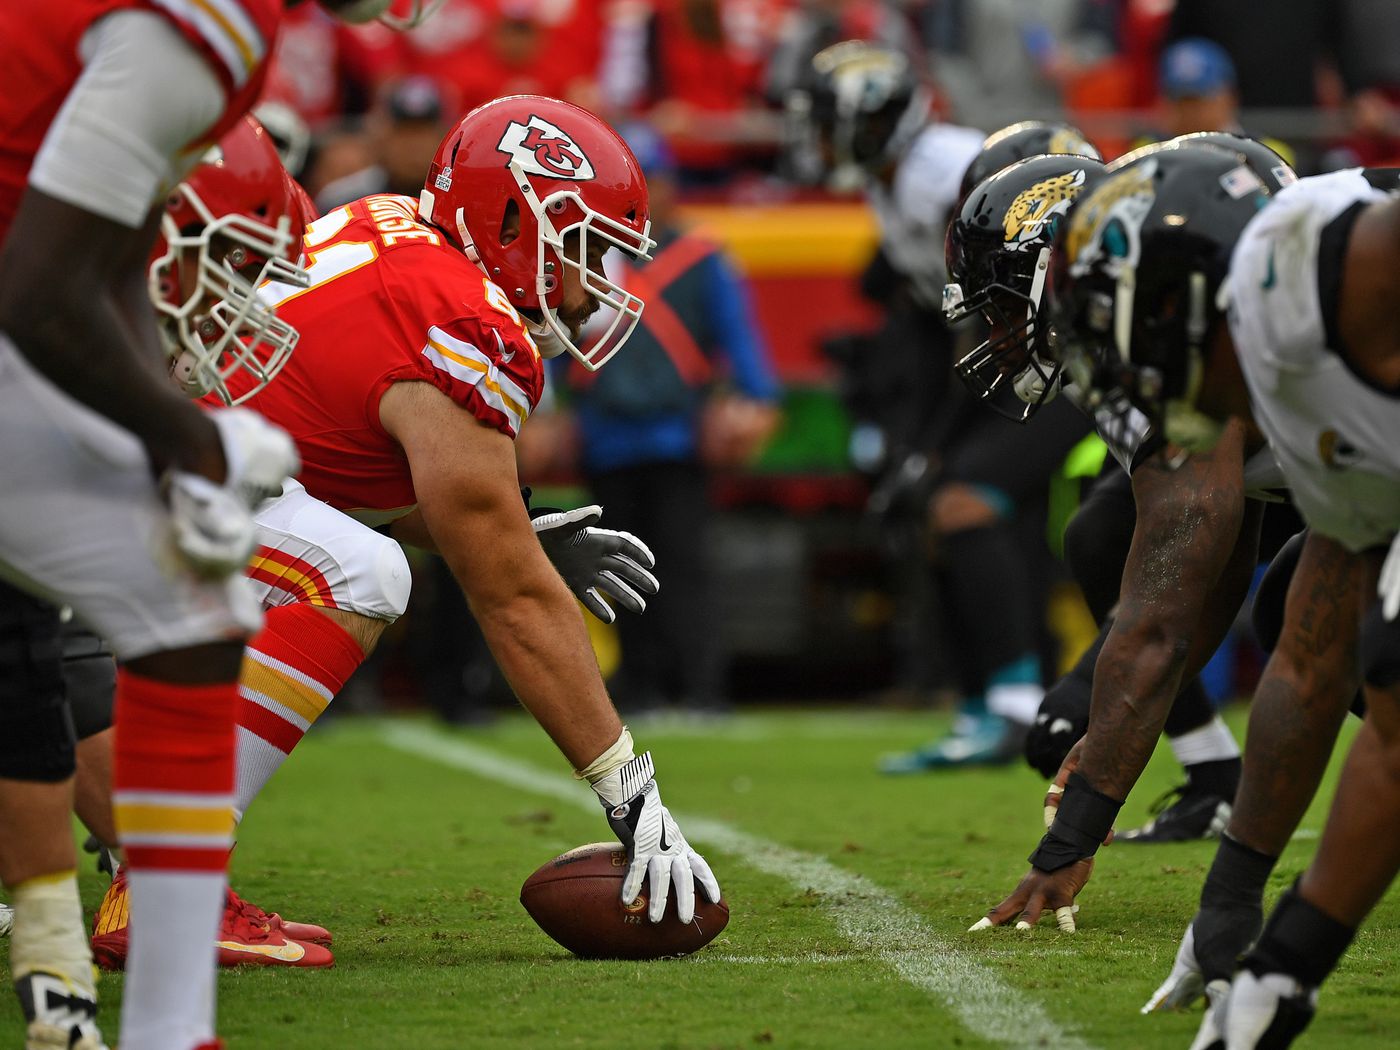 Jaguars vs. Chiefs playoff game faces winter weather challenges in